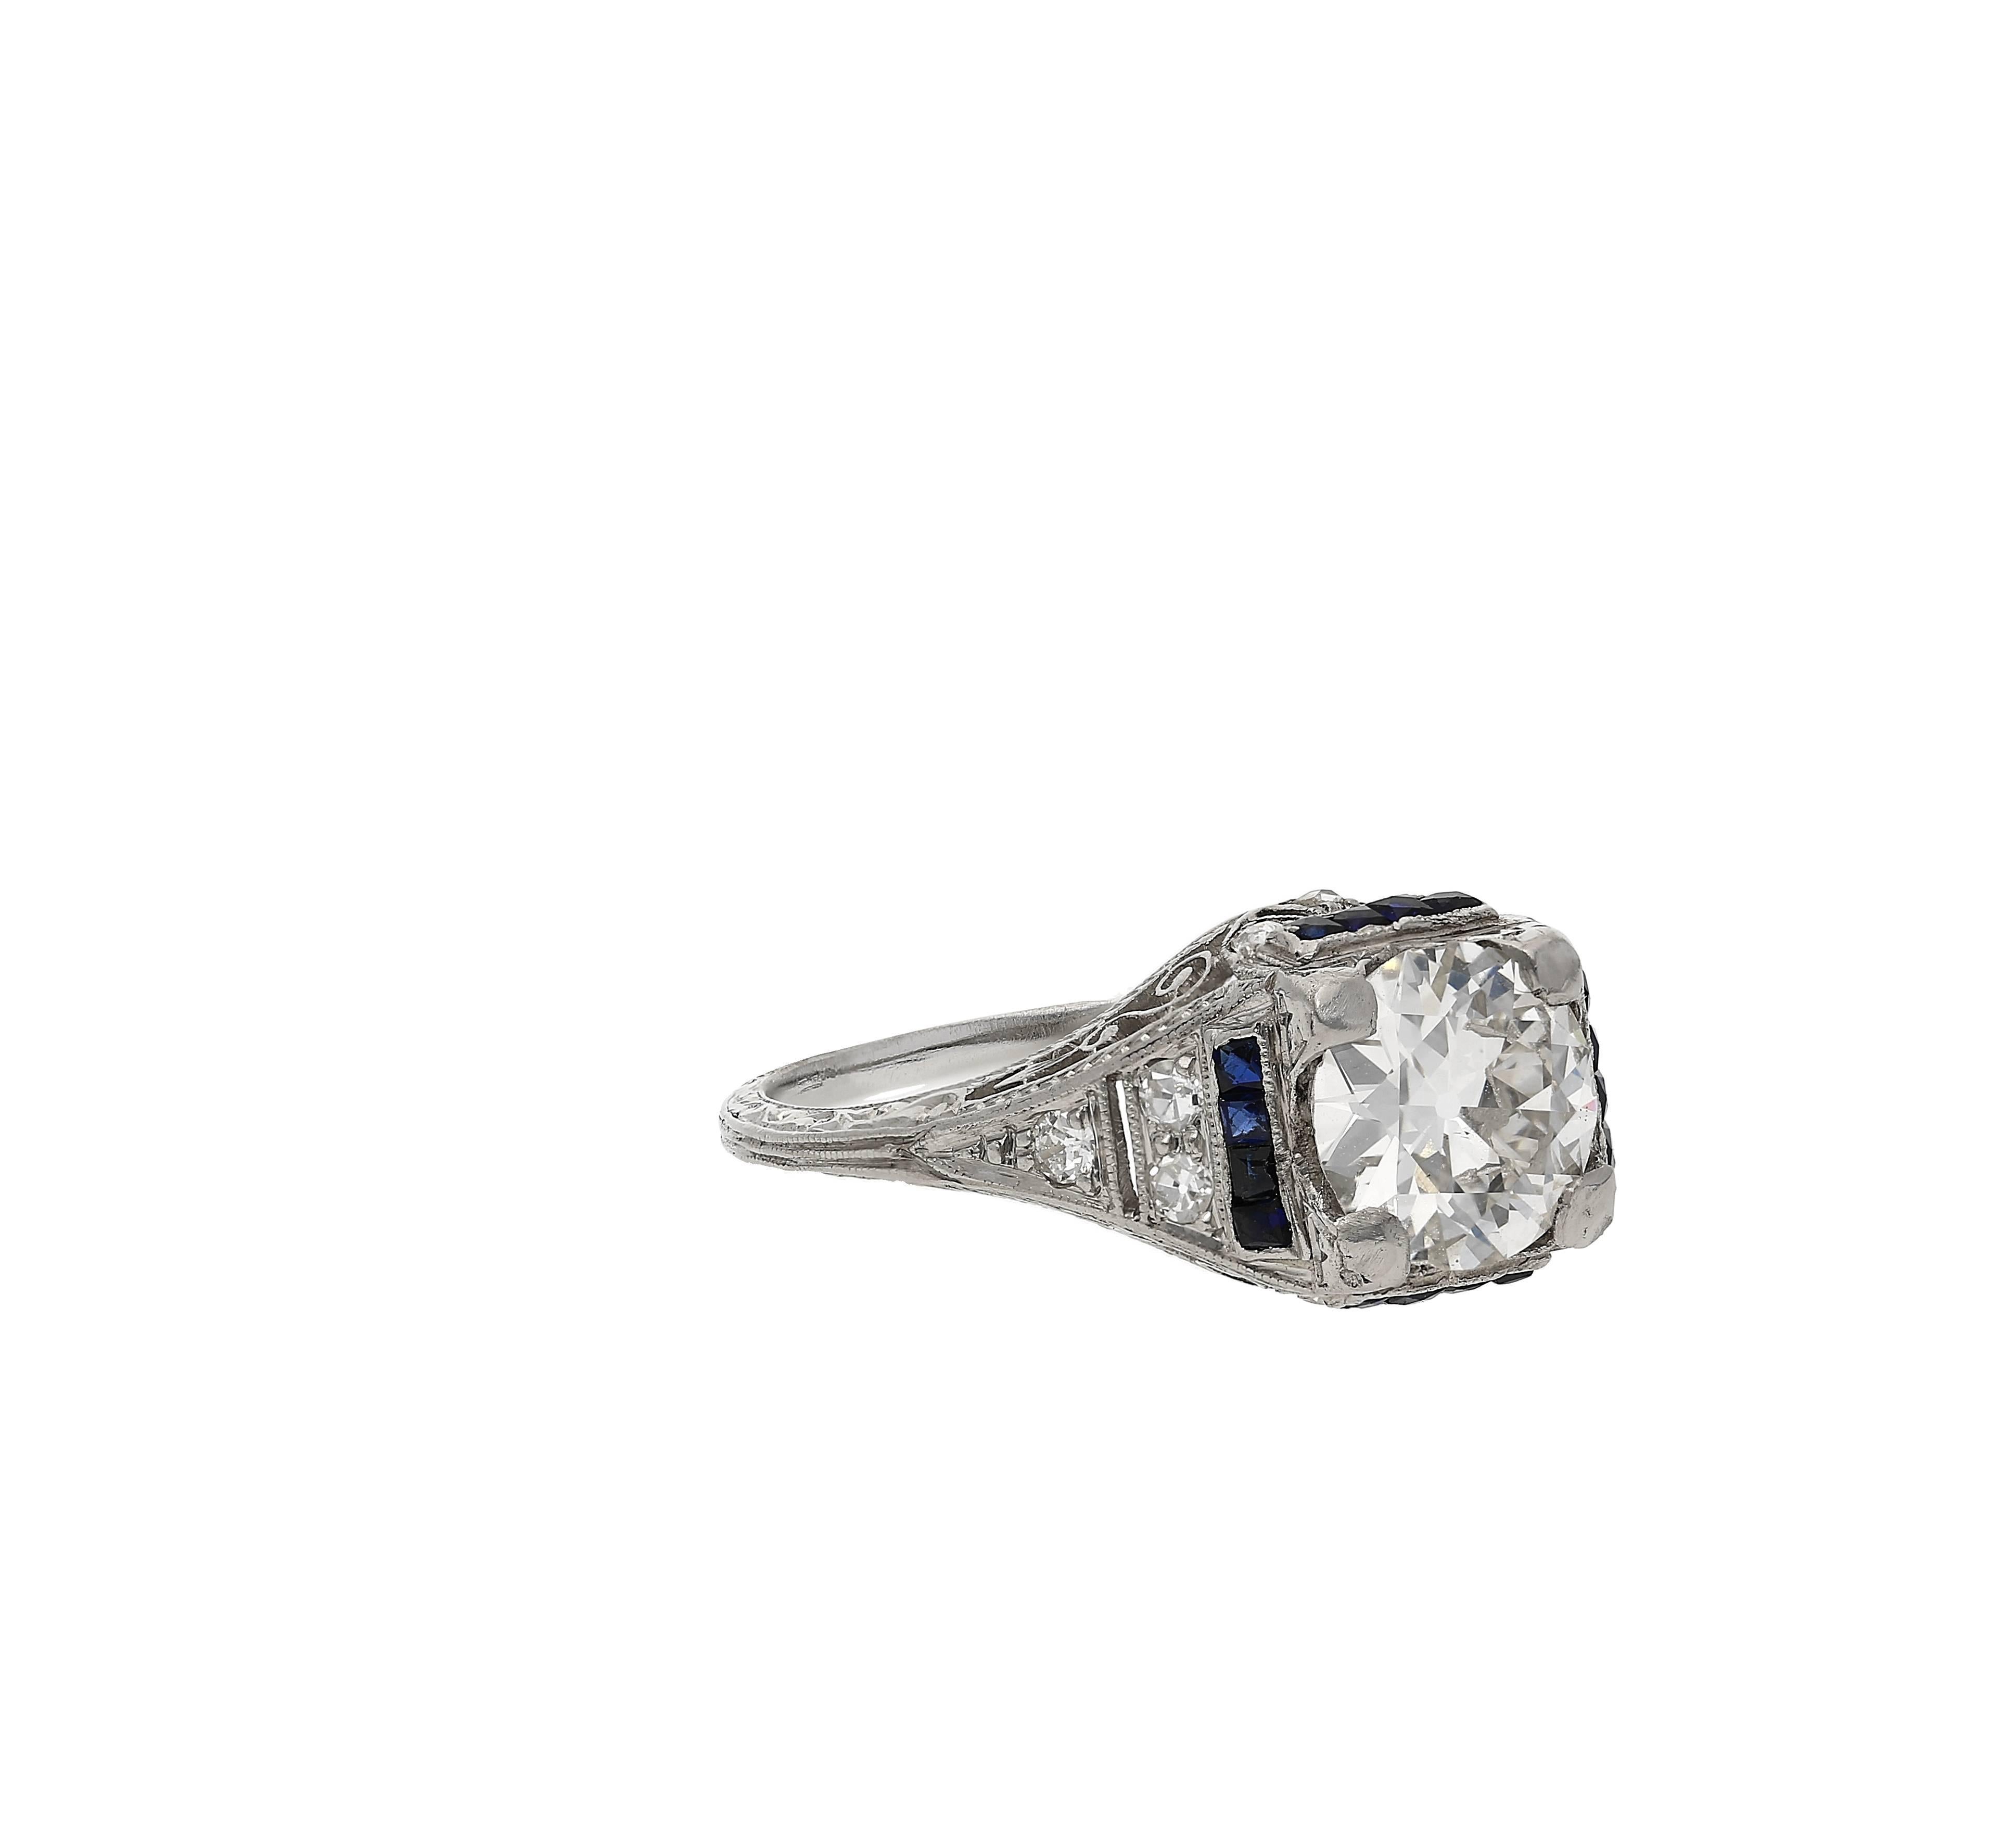 Centre-Stone weighs approximately 1.28 Carats
Set in PT900 Platinum
Accented by 12 Round-Brilliant Cut Diamonds and 16 Emerald-Cut Synthetic Sapphires
